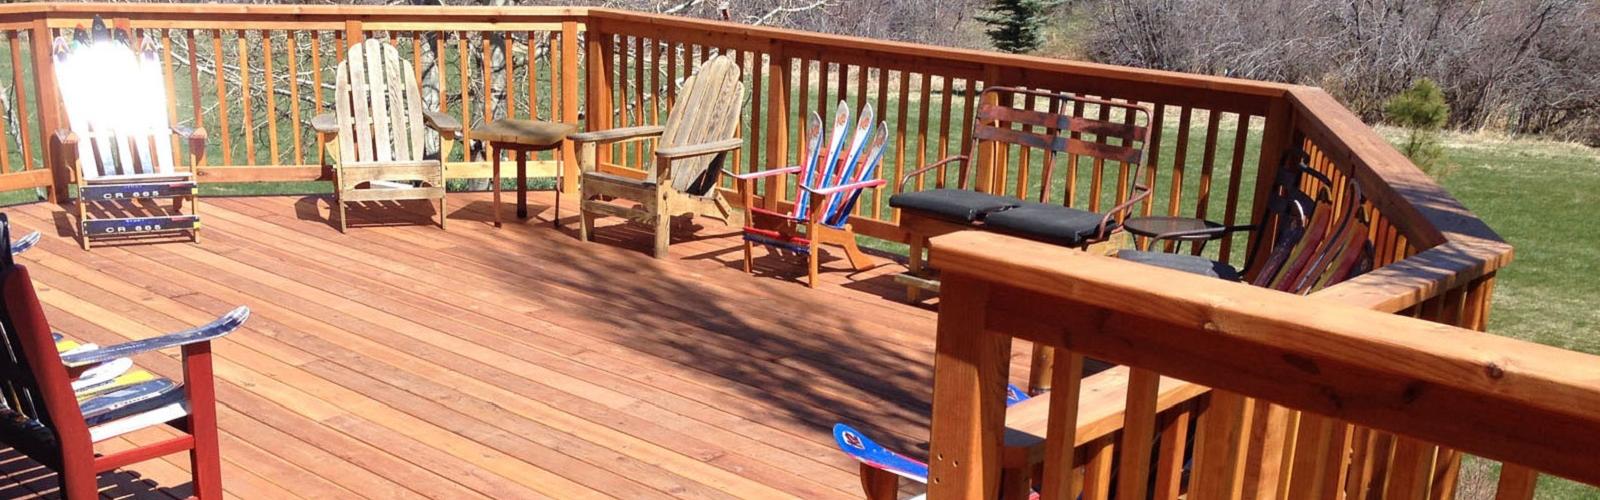 Redwood decking and railing